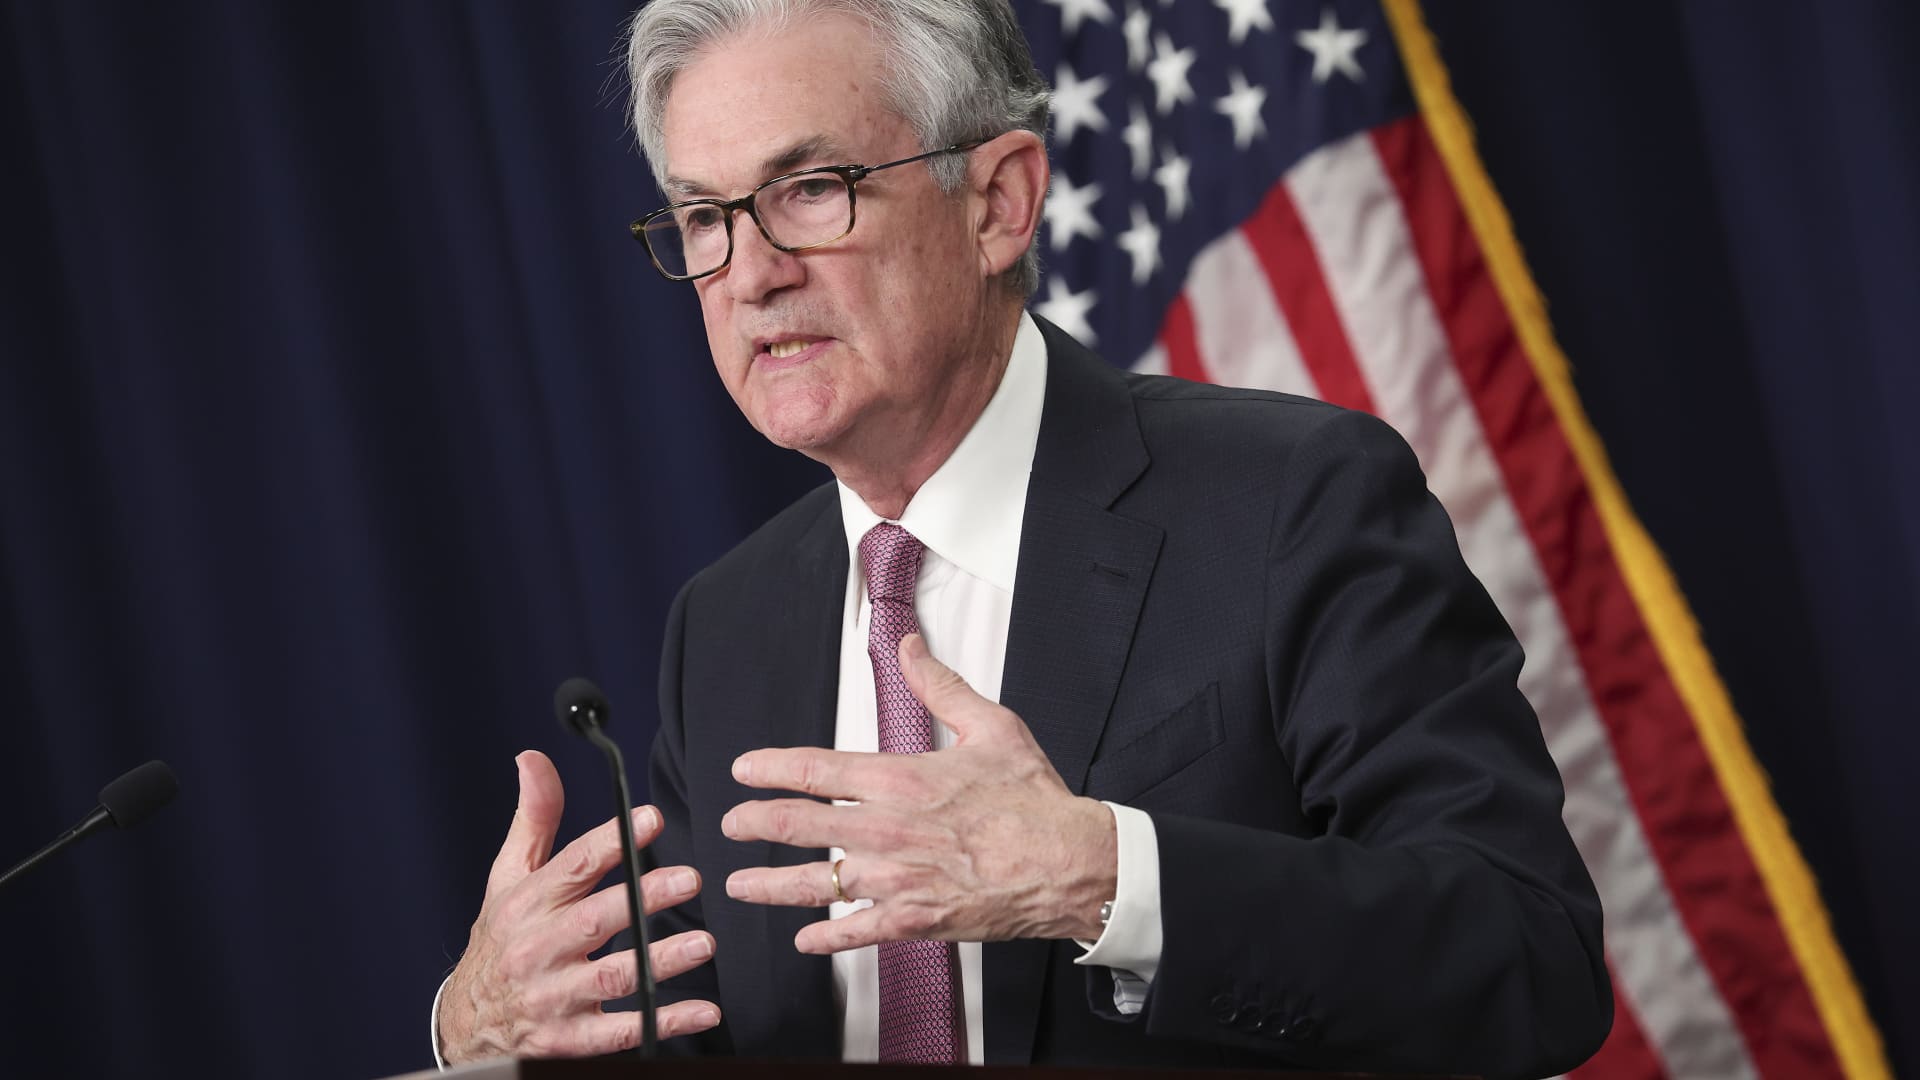 Federal Reserve Chairman Jerome Powell speaks at a news conference following a Federal Open Market Committee meeting on May 04, 2022 in Washington, DC.